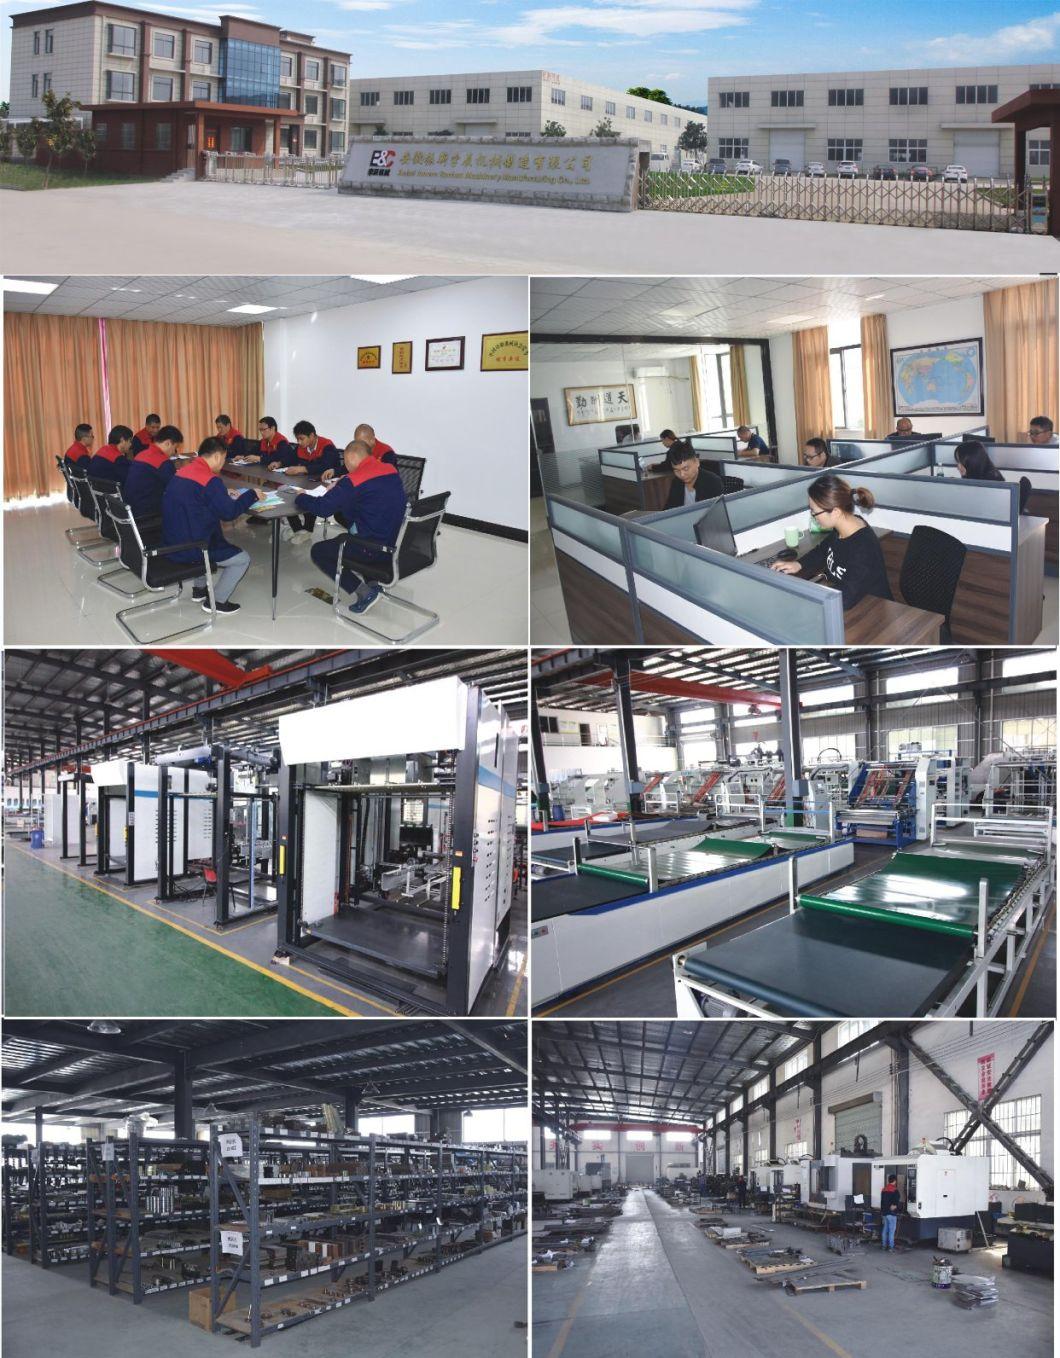 Double Pieces Two Side Gluing Conveyor Machine